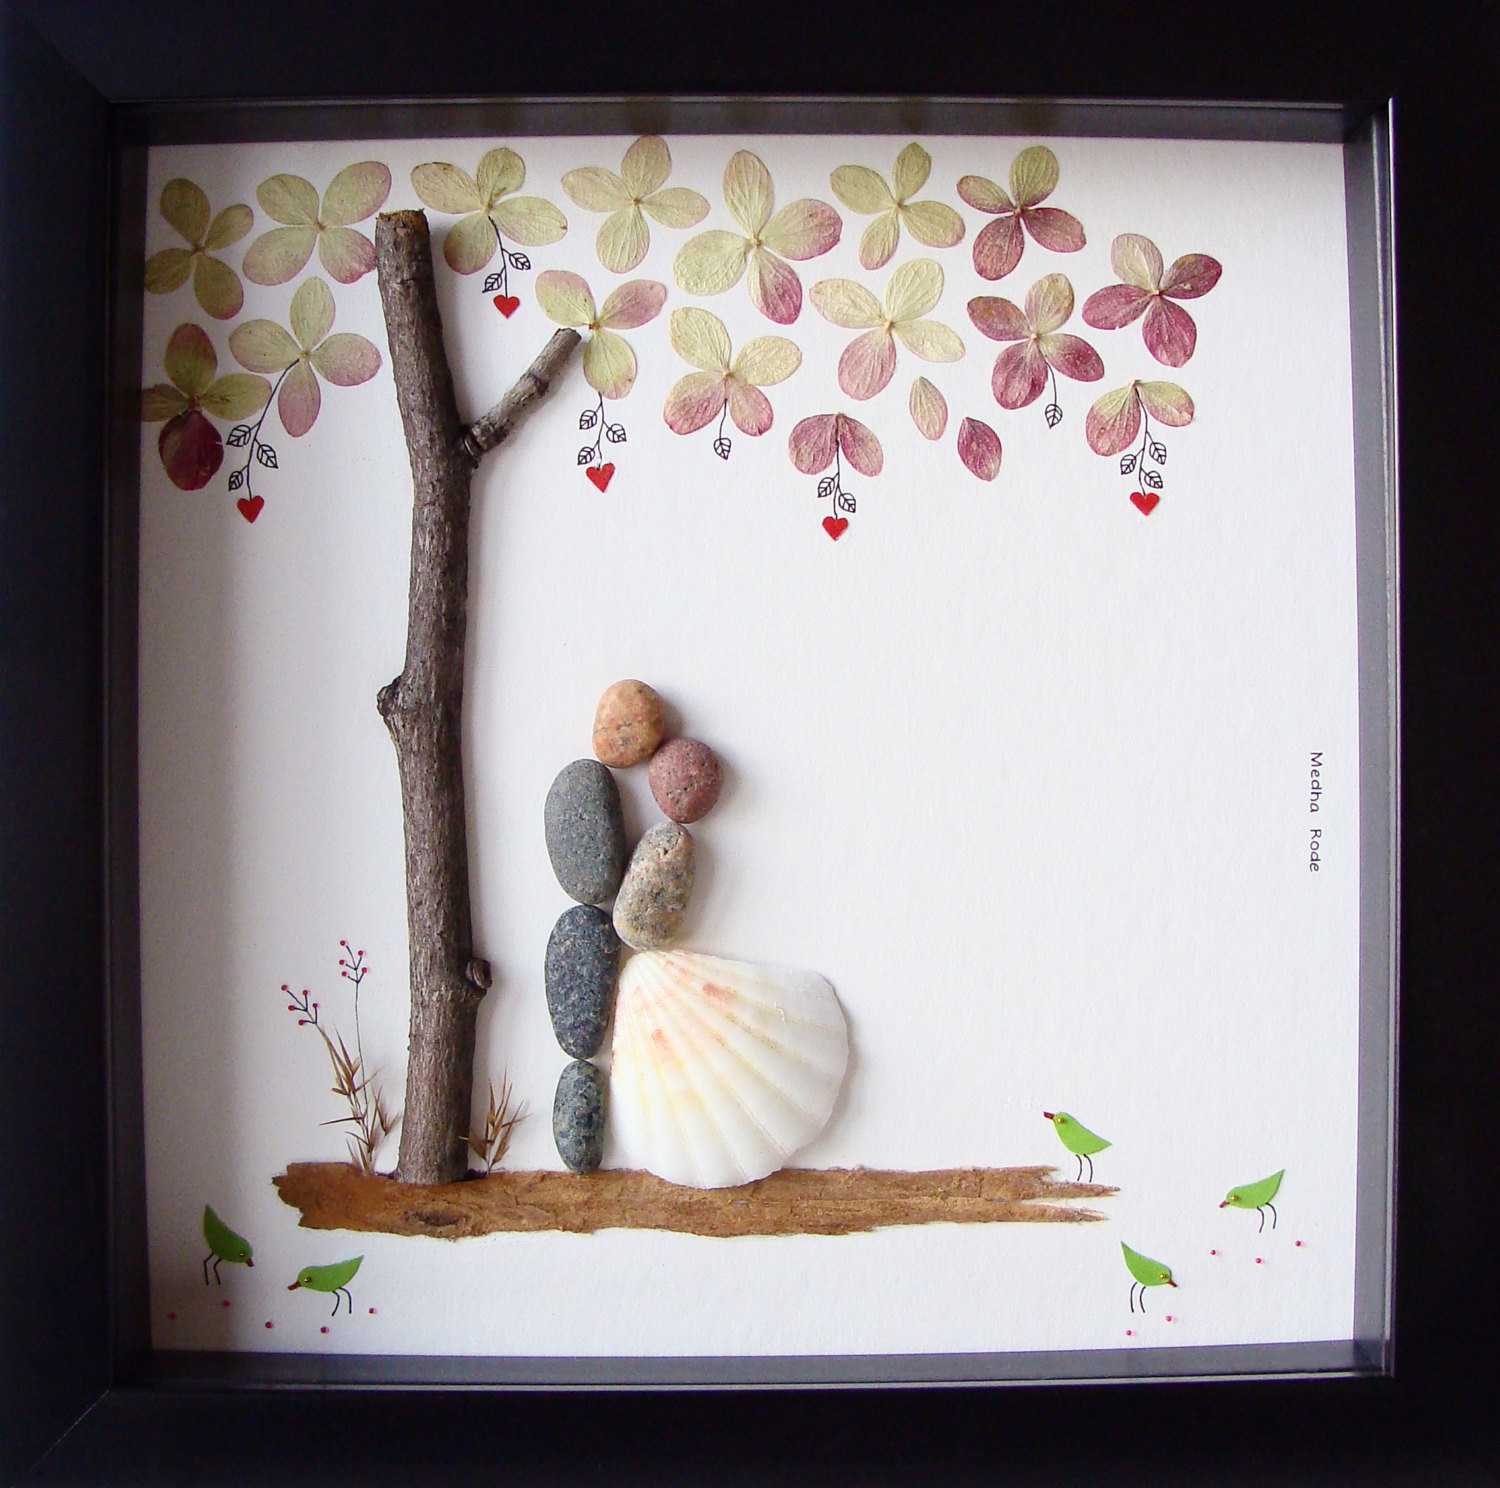 Wedding Gift Ideas For The Couple
 Unique Wedding Gift For Couple Wedding Pebble Art by MedhaRode